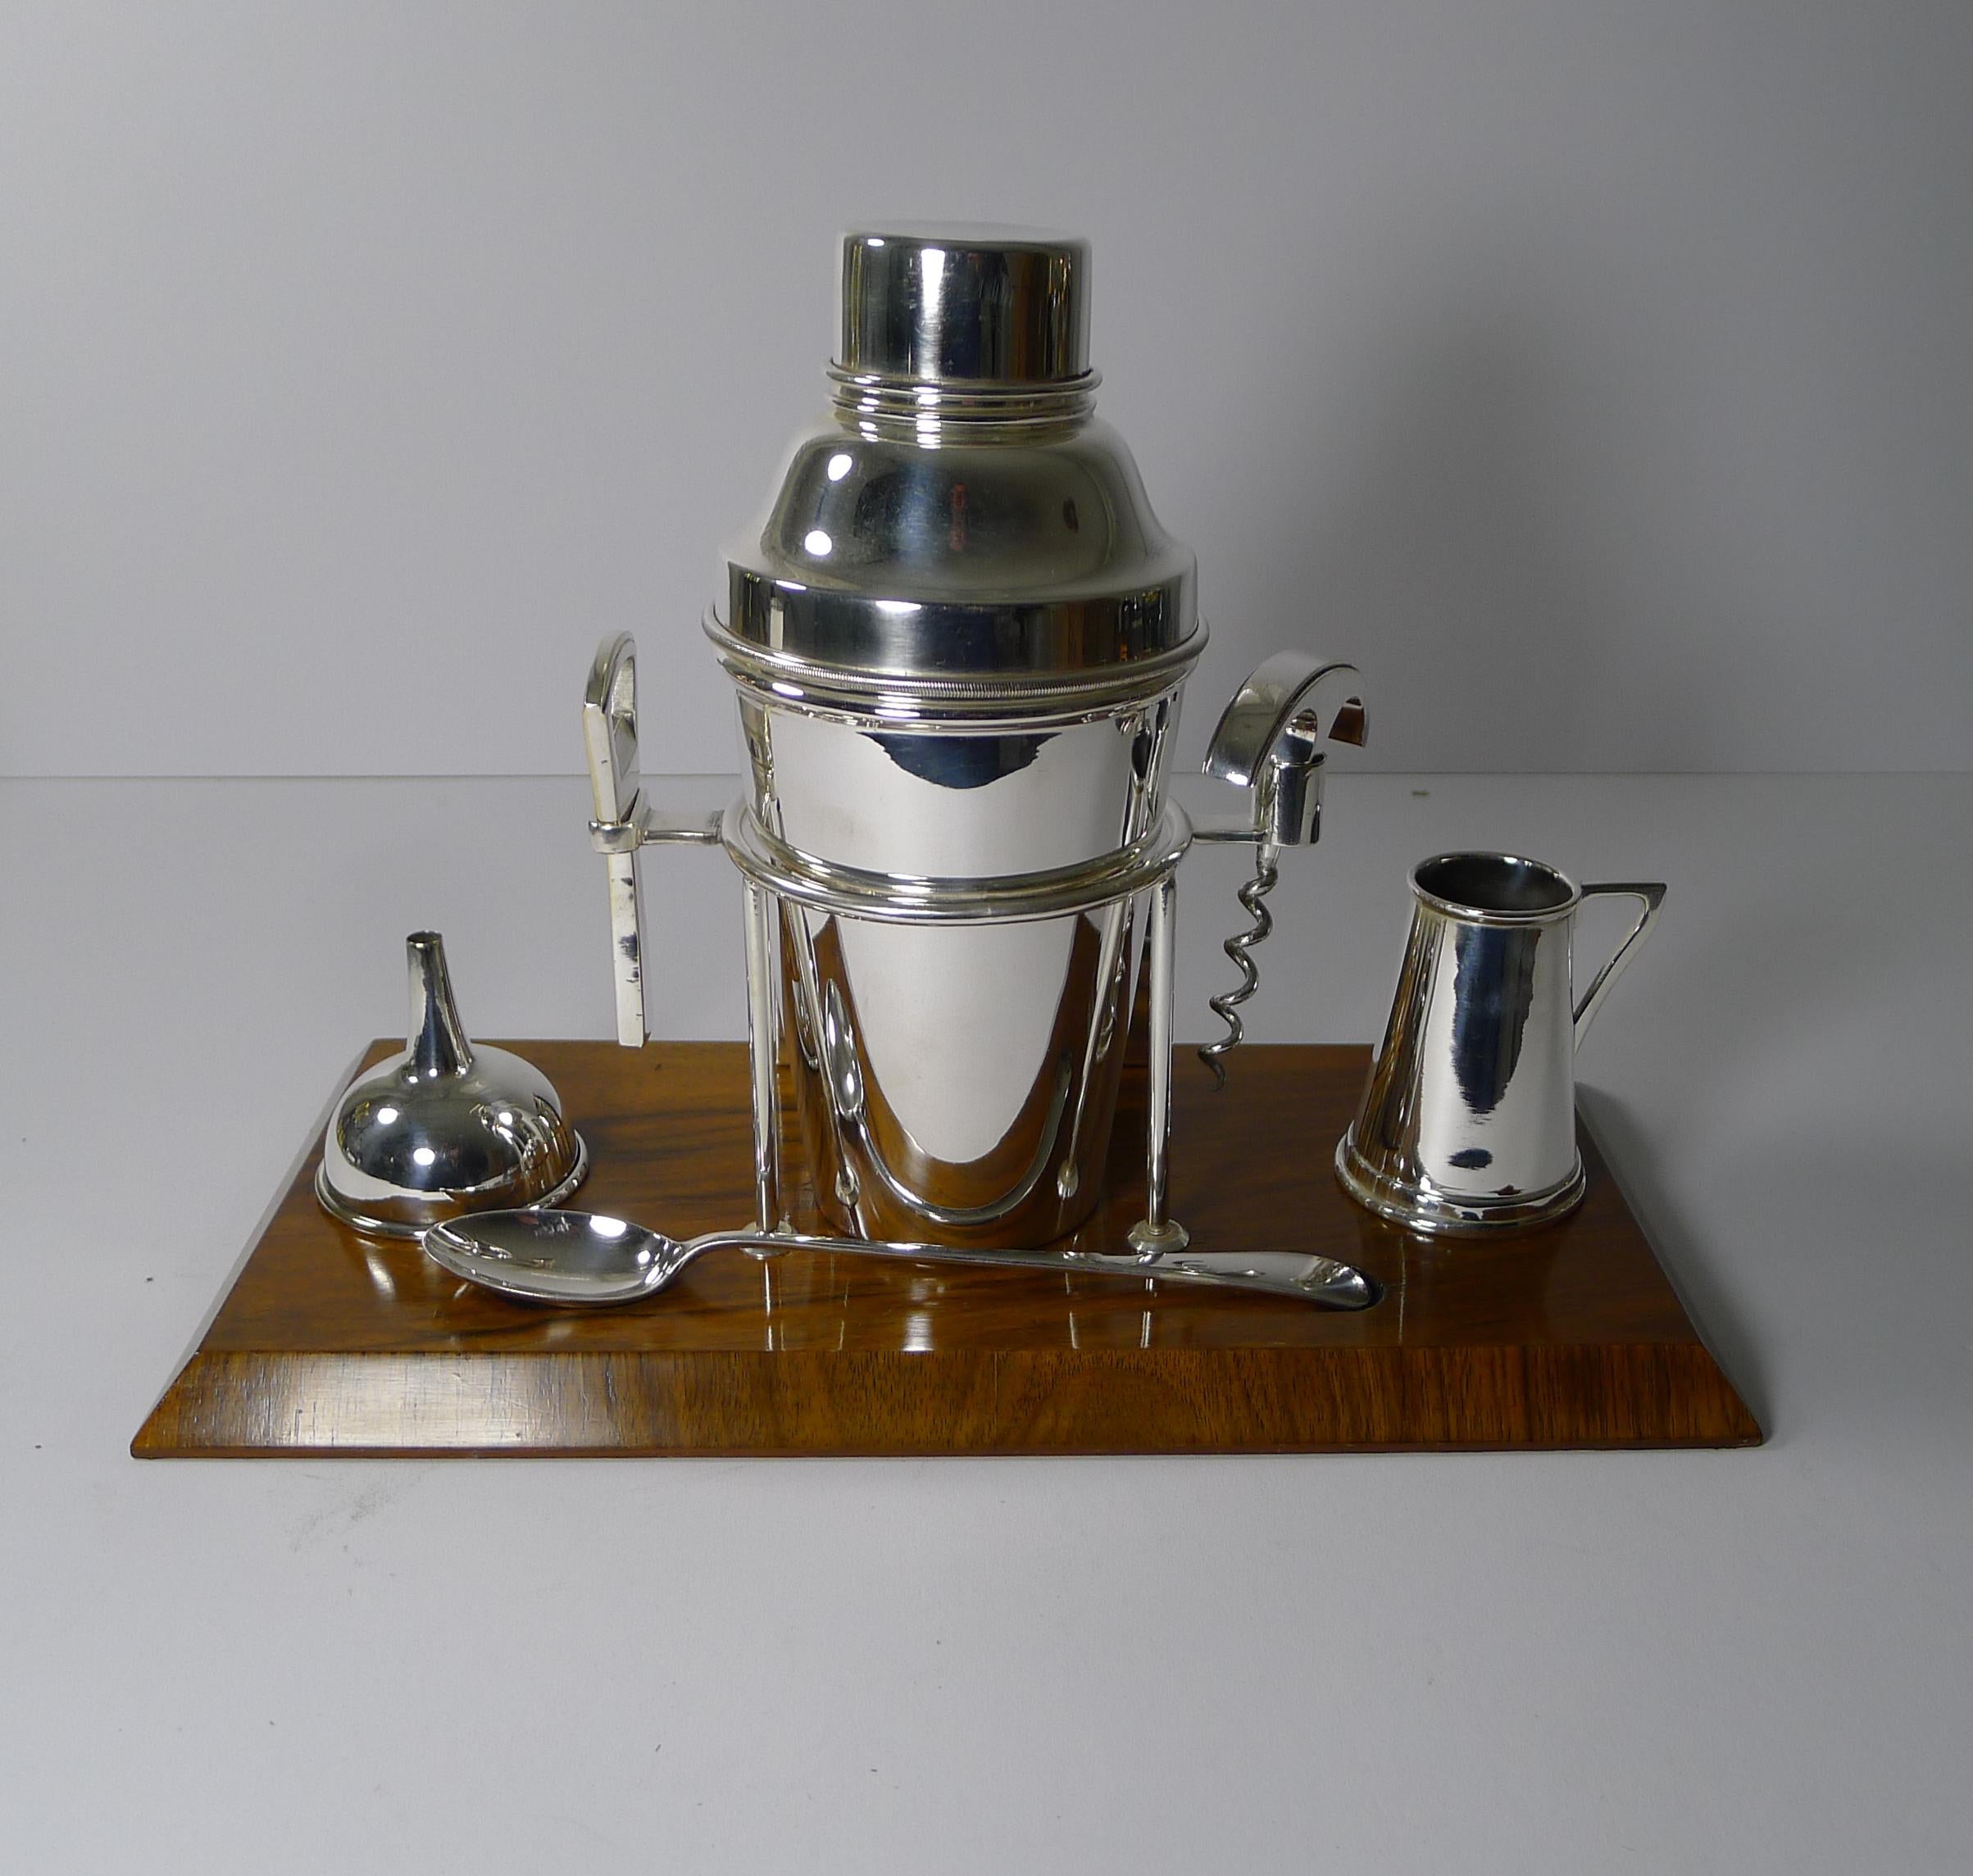 A handsome Walnut and Silver Plated Drinks / Cocktail set dating to c.1930.

The Walnut stand houses a central silver plated cocktail shaker flanked by a bottler opener and corkscrew; to the right is a spirit measure / jigger and to the left is a